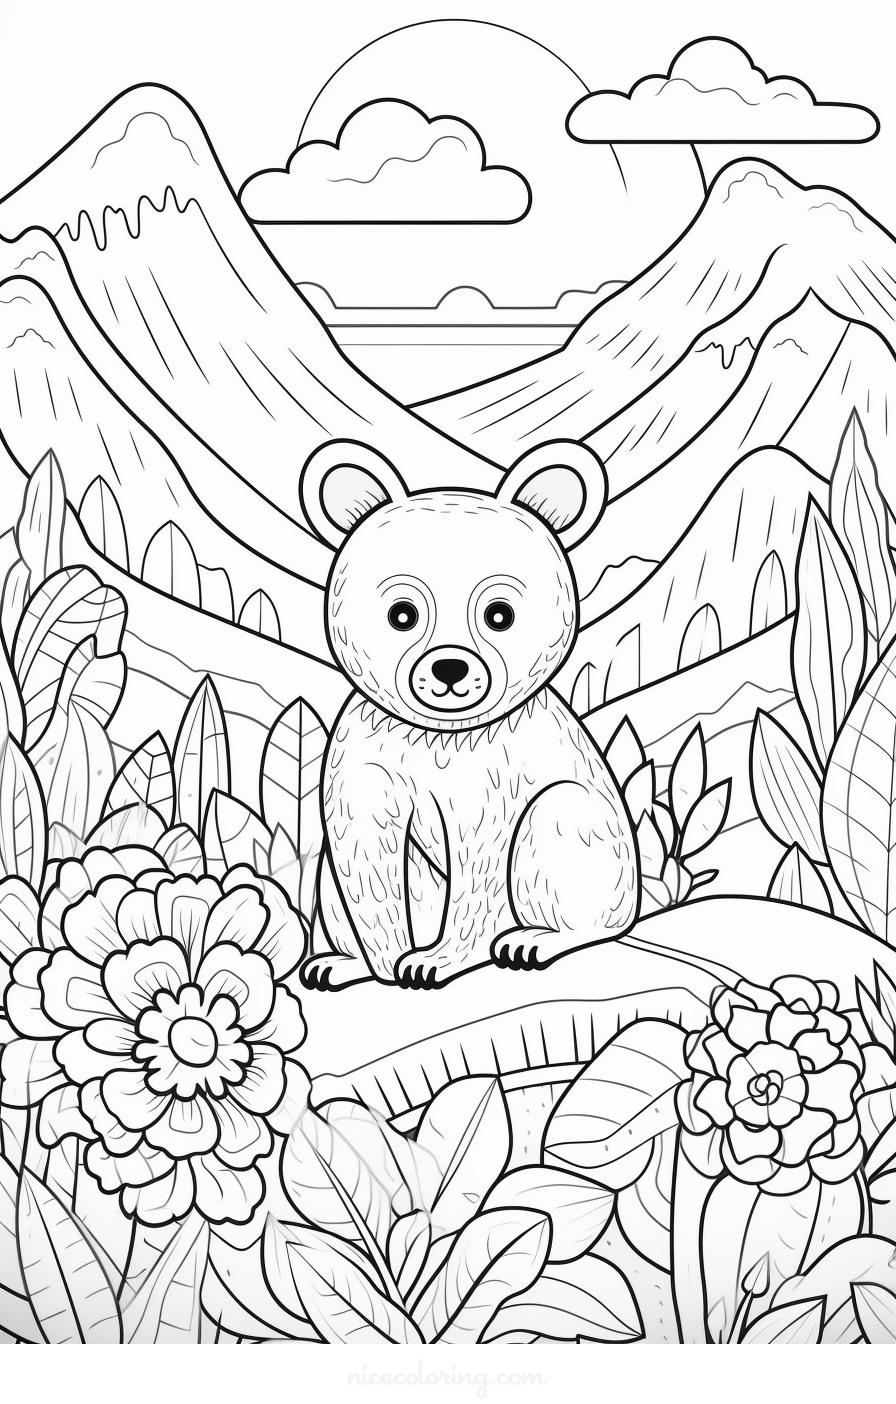 Bear family in a forest coloring scene